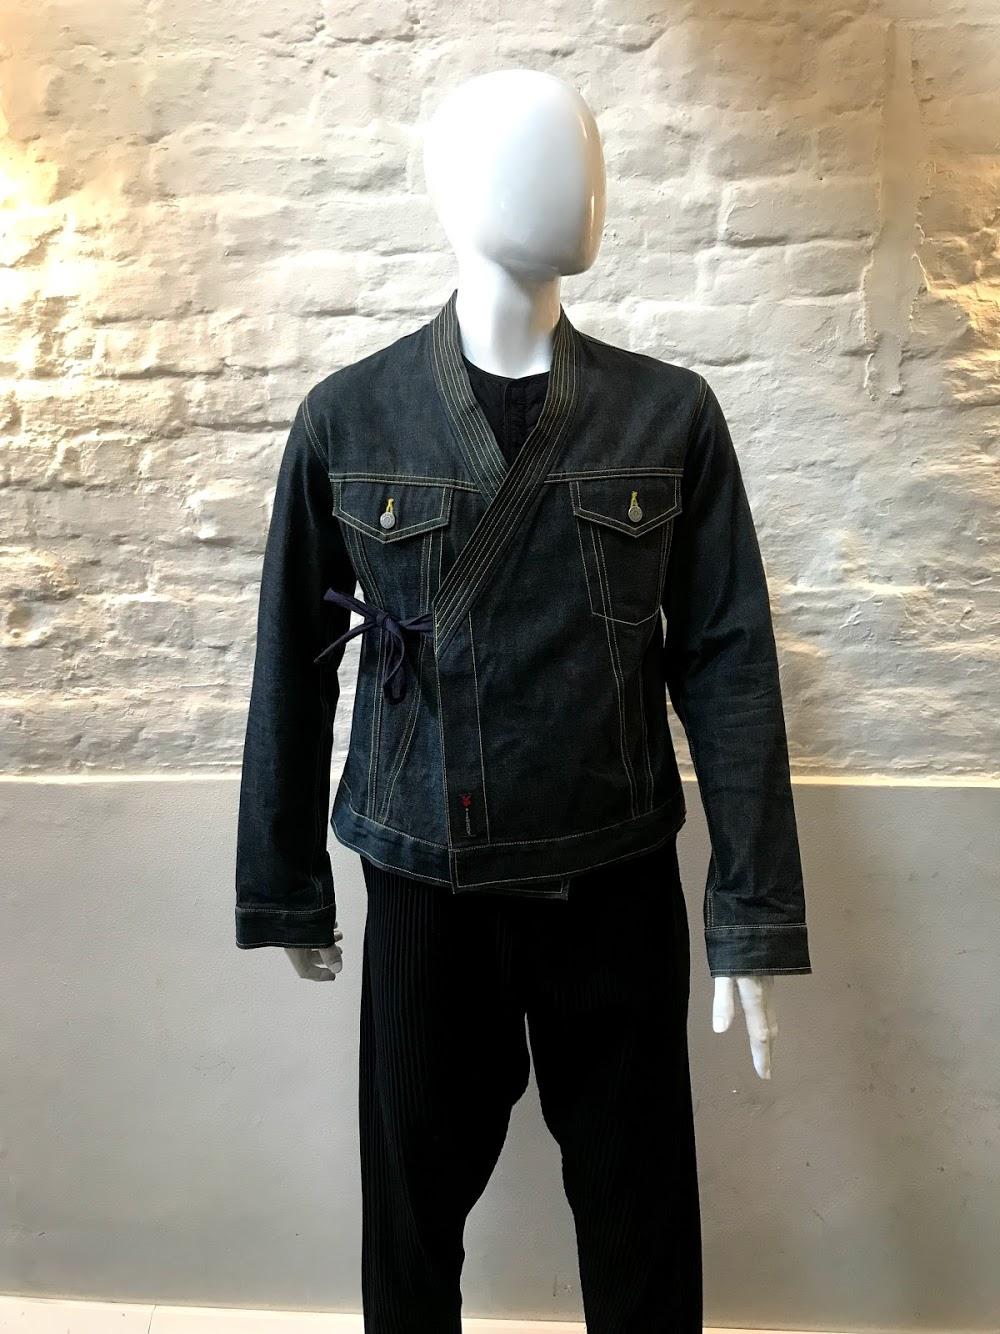 Michiko Koshino Kimono Tie Denim jacket made in Belgium. 

Respected by London’s fashion community as one of the industry’s original innovators, Michiko Koshino was among the wave of Japanese talent to descend into Europe during the early 80’s,